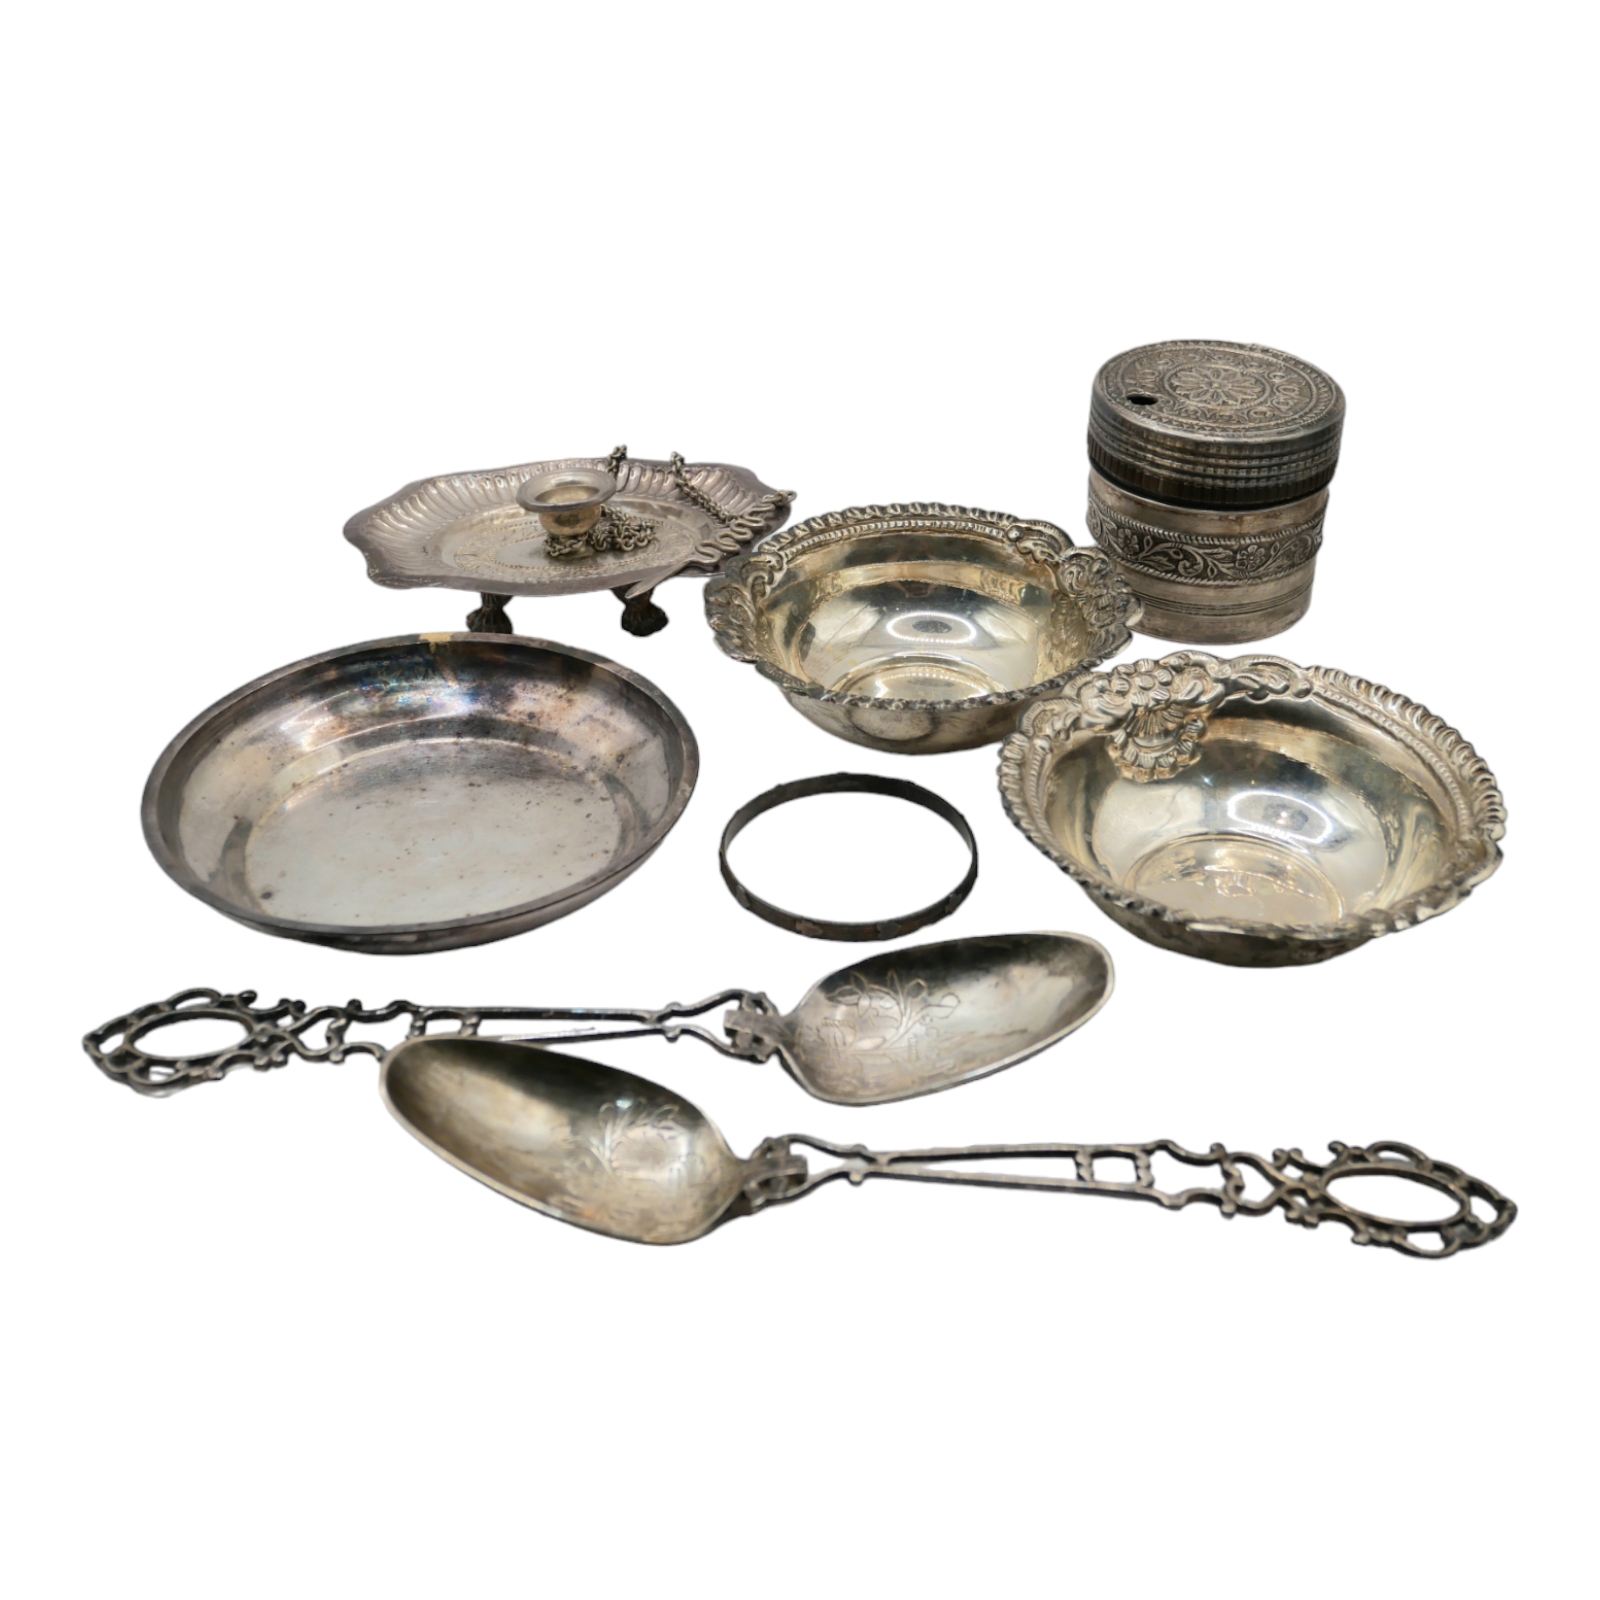 A COLLECTION OF LATE 19TH CENTURY AND LATER INDIAN SILVER ITEMS Comprising two floral repoussé